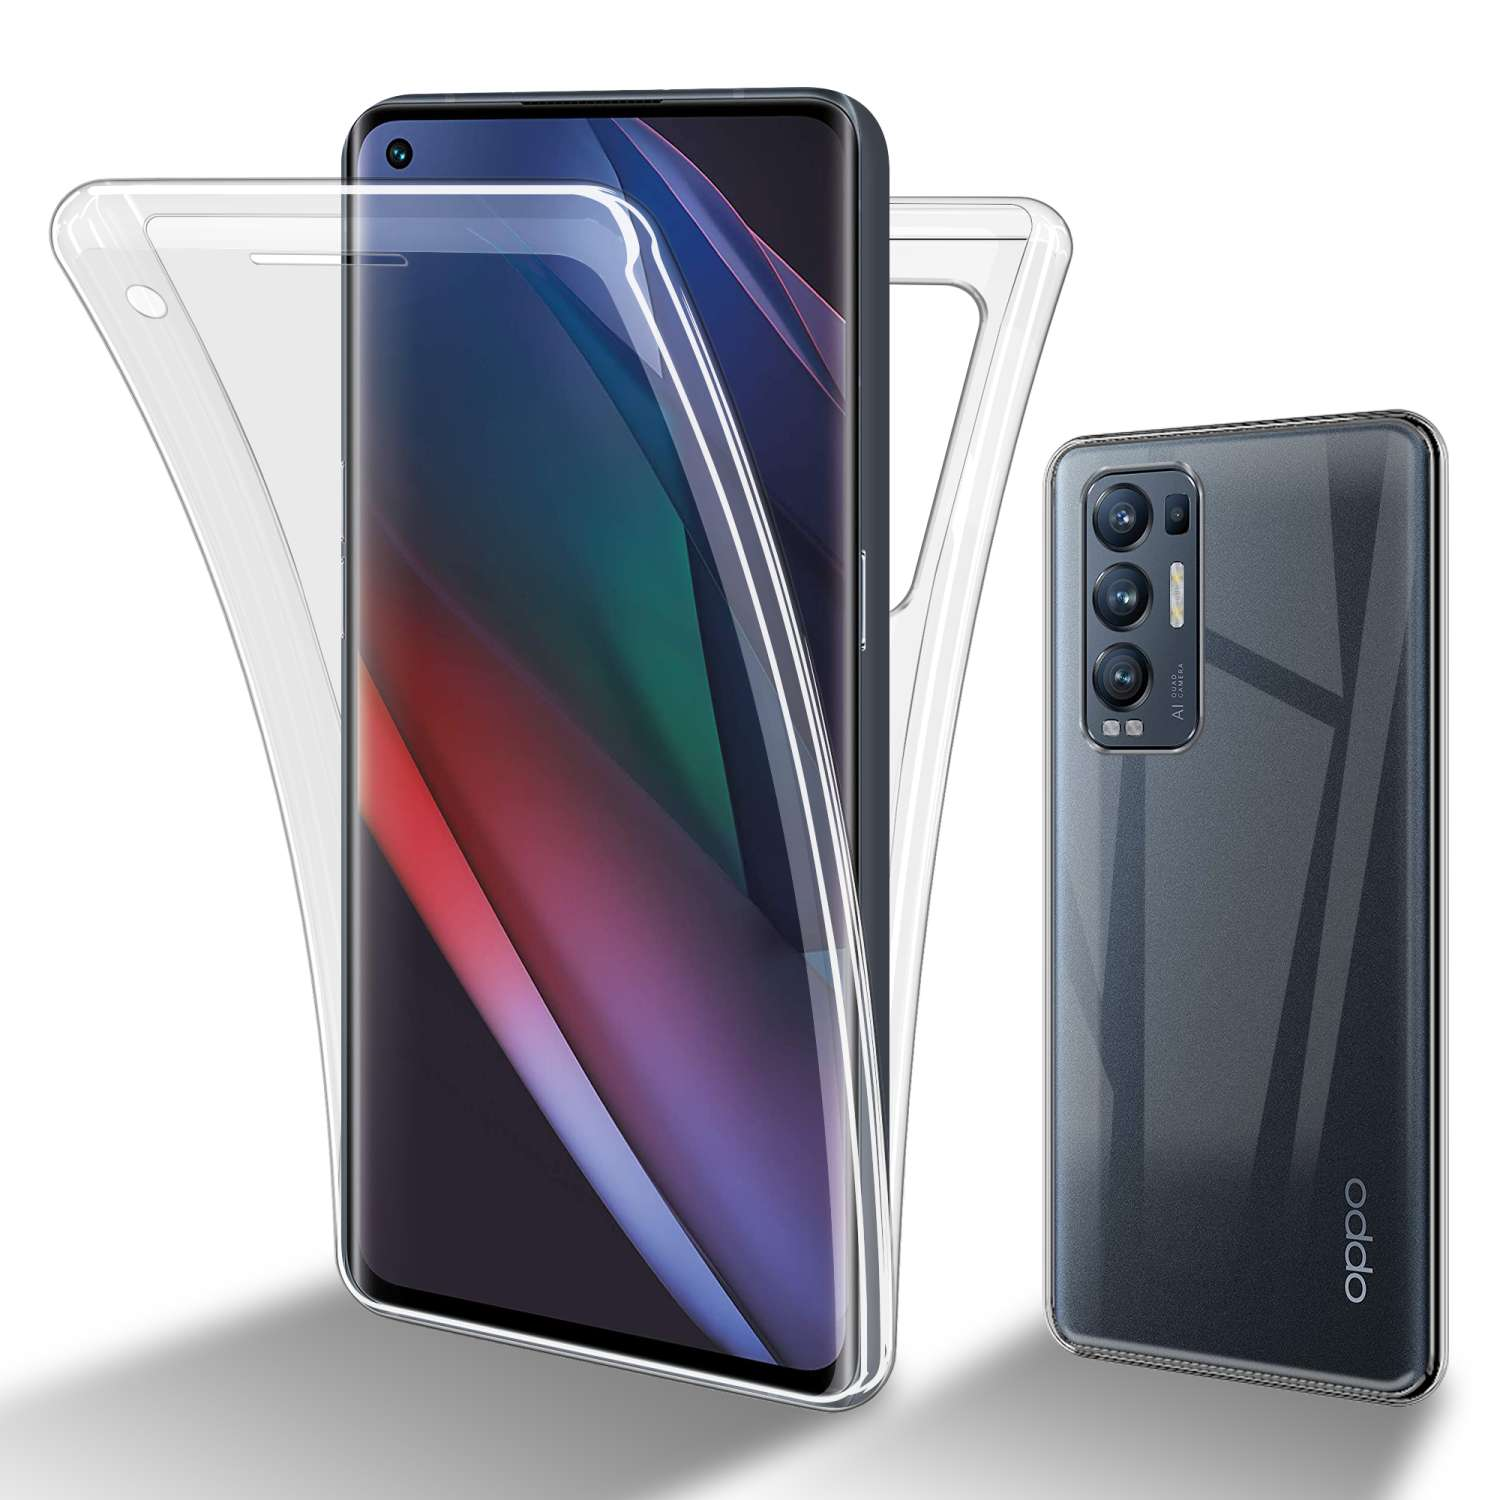 CADORABO TPU 360 Grad Hülle, X3 TRANSPARENT Backcover, FIND Oppo, NEO, Case